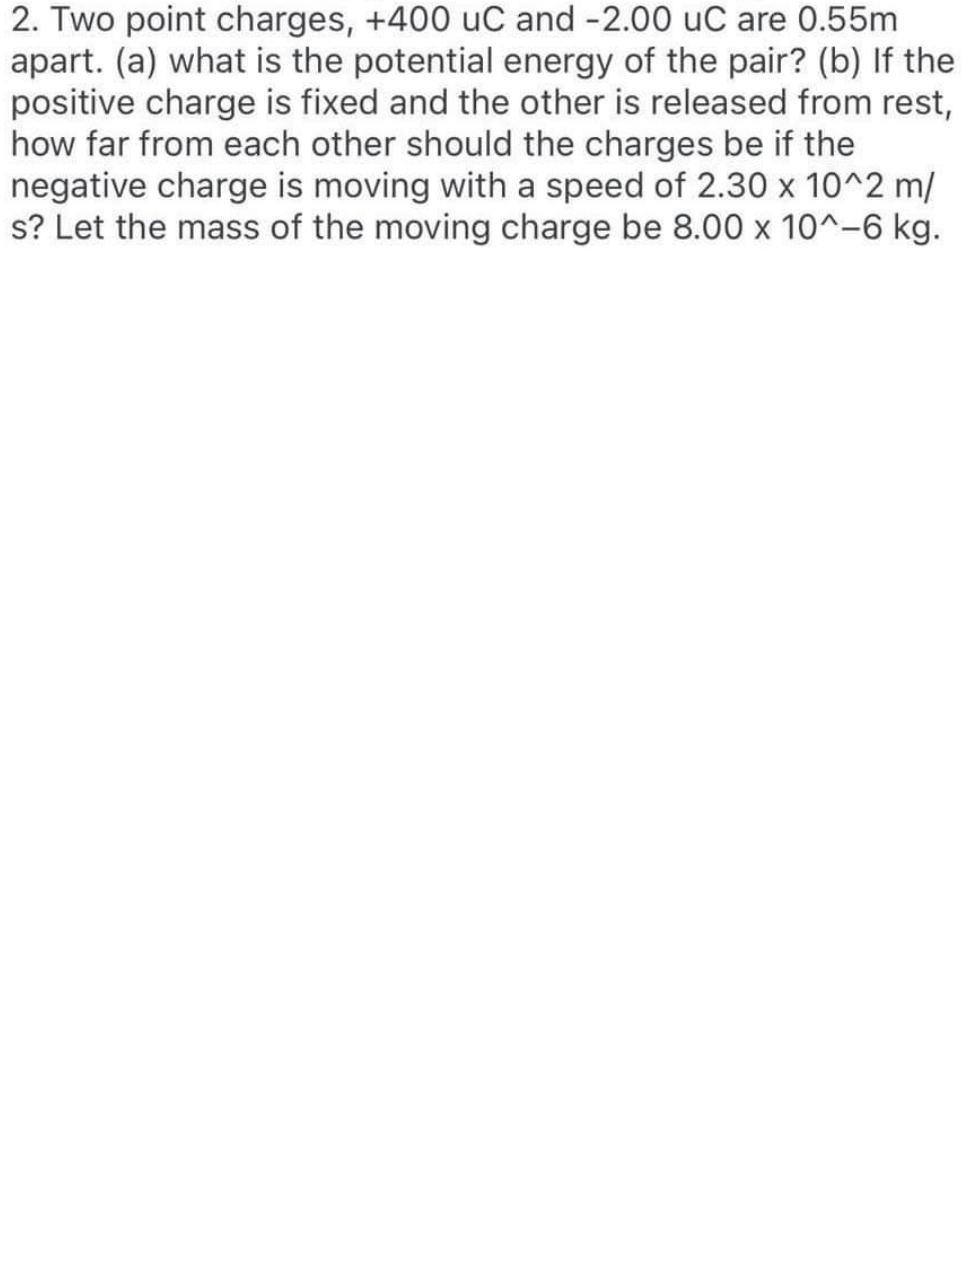 2. Two point charges, +400 uC and -2.00 uC are 0.55m
apart. (a) what is the potential energy of the pair? (b) If the
positive charge is fixed and the other is released from rest,
how far from each other should the charges be if the
negative charge is moving with a speed of 2.30 x 10^2 m/
s? Let the mass of the moving charge be 8.00 x 10^-6 kg.
